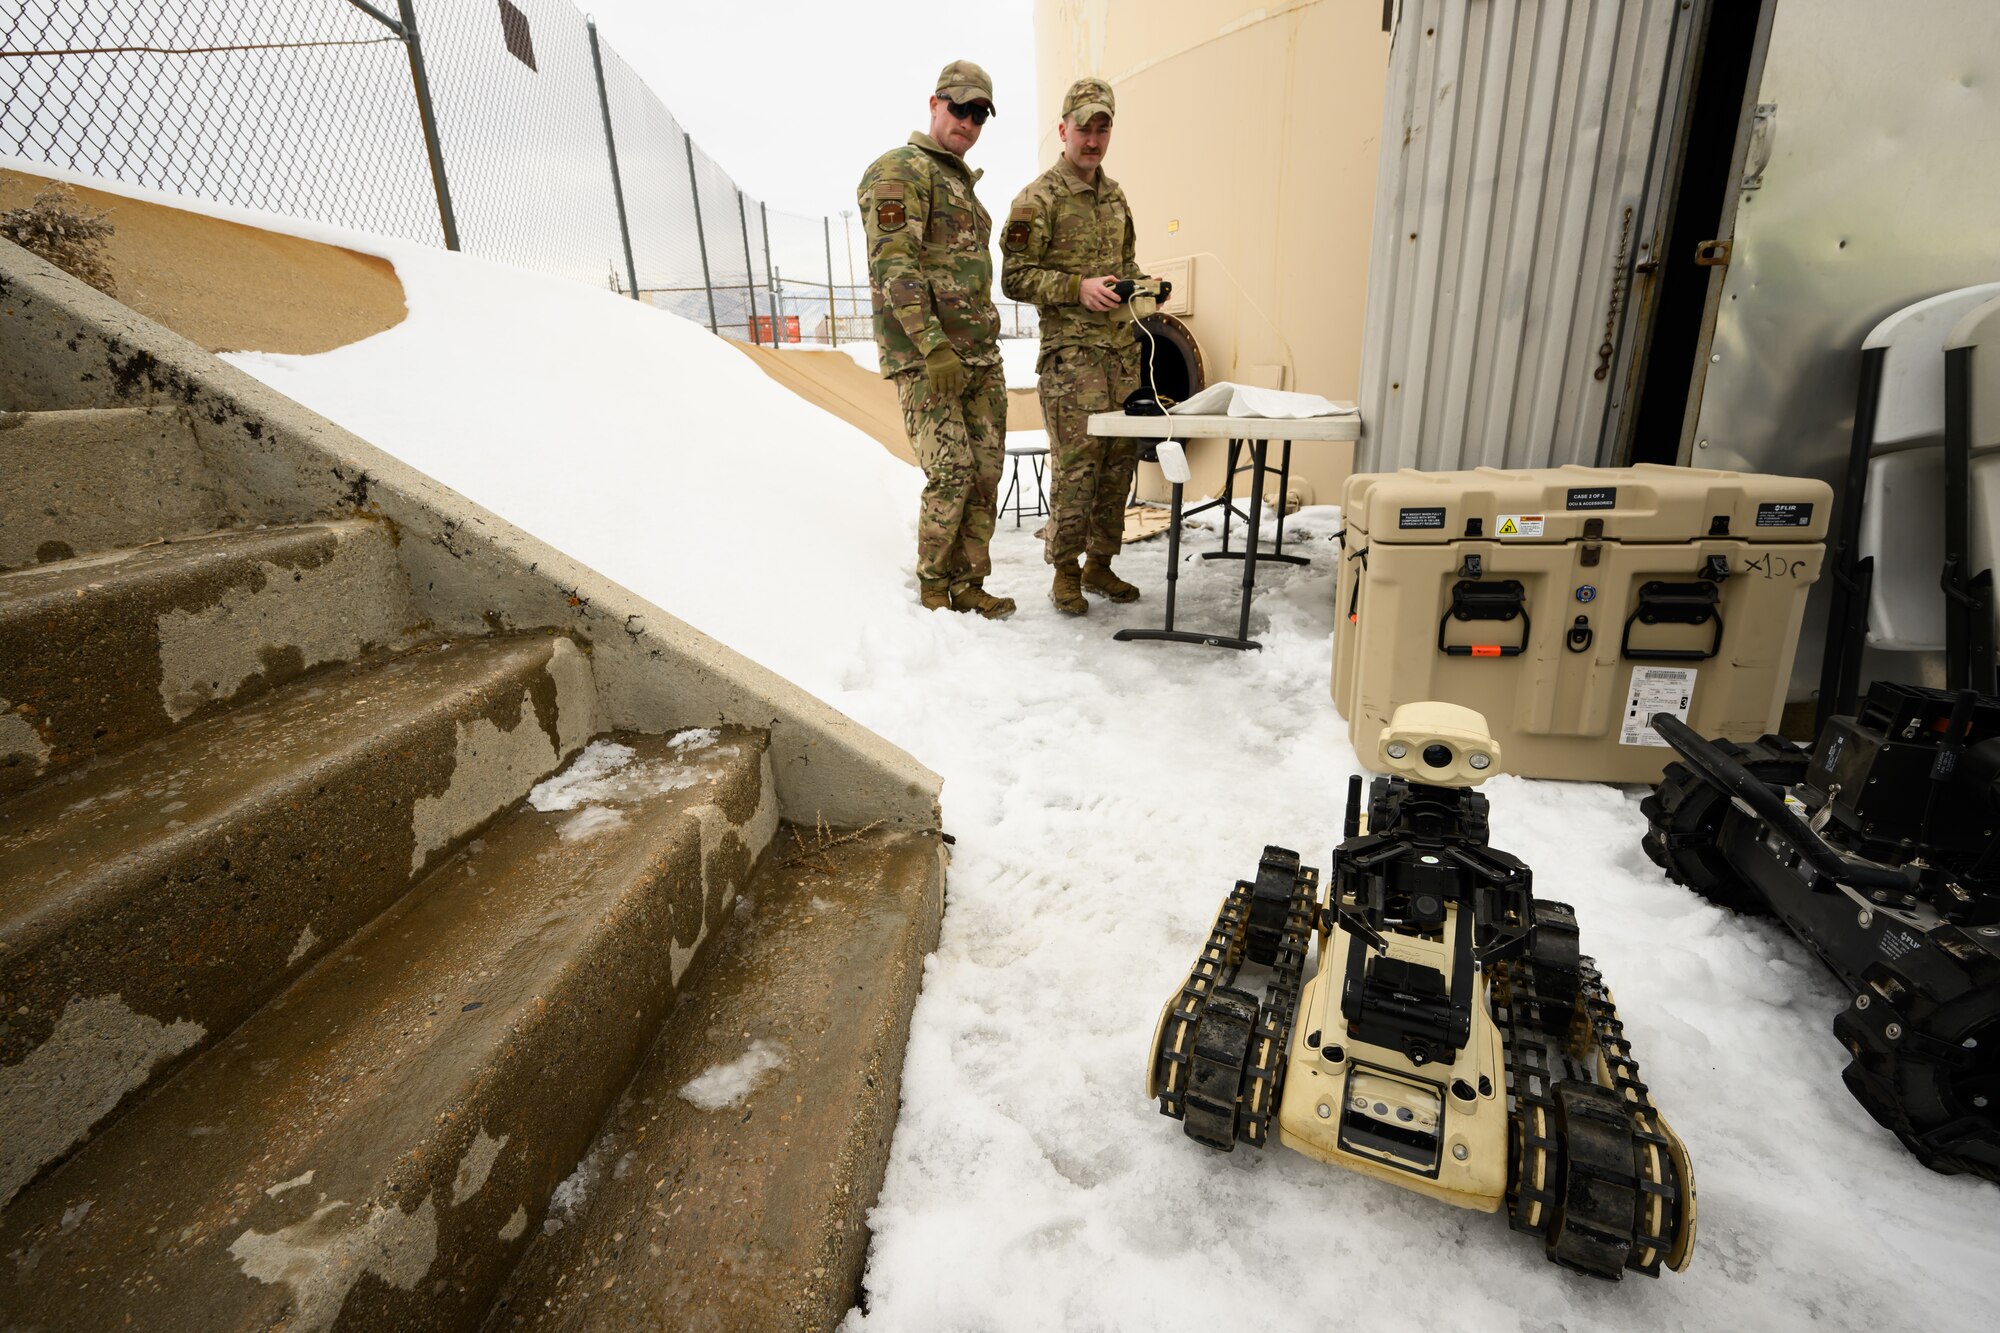 Two airmen drive a robot along the snow covered ground